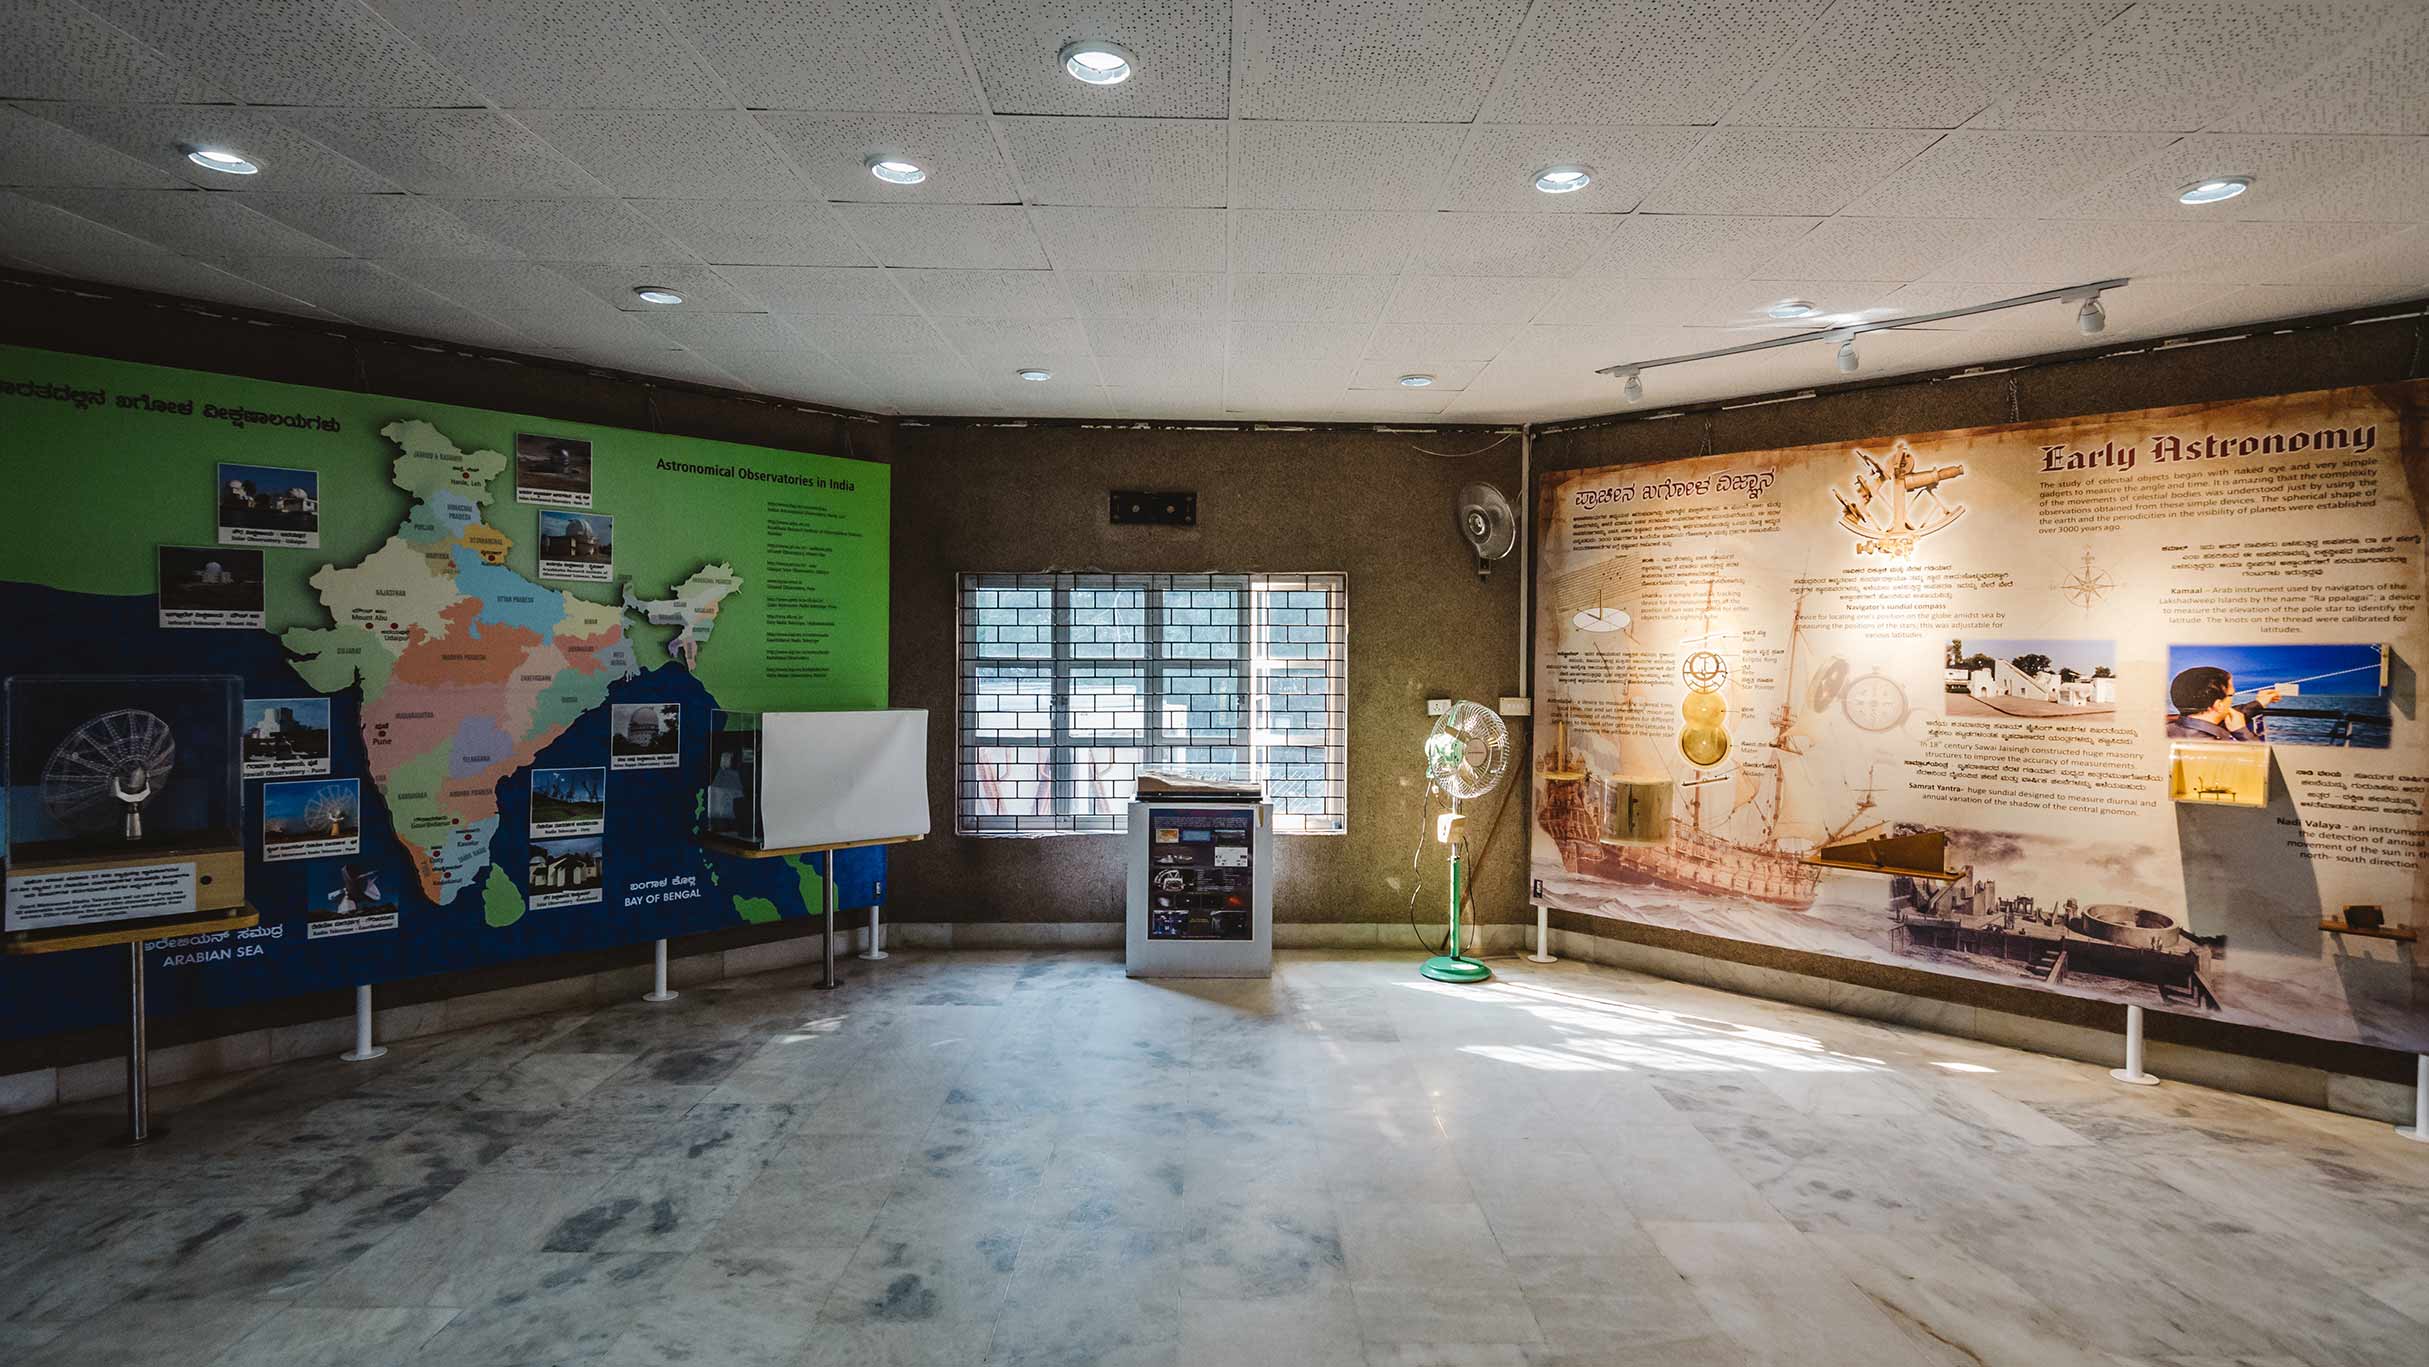 Interior space of the museum displaying the history of astronomy 